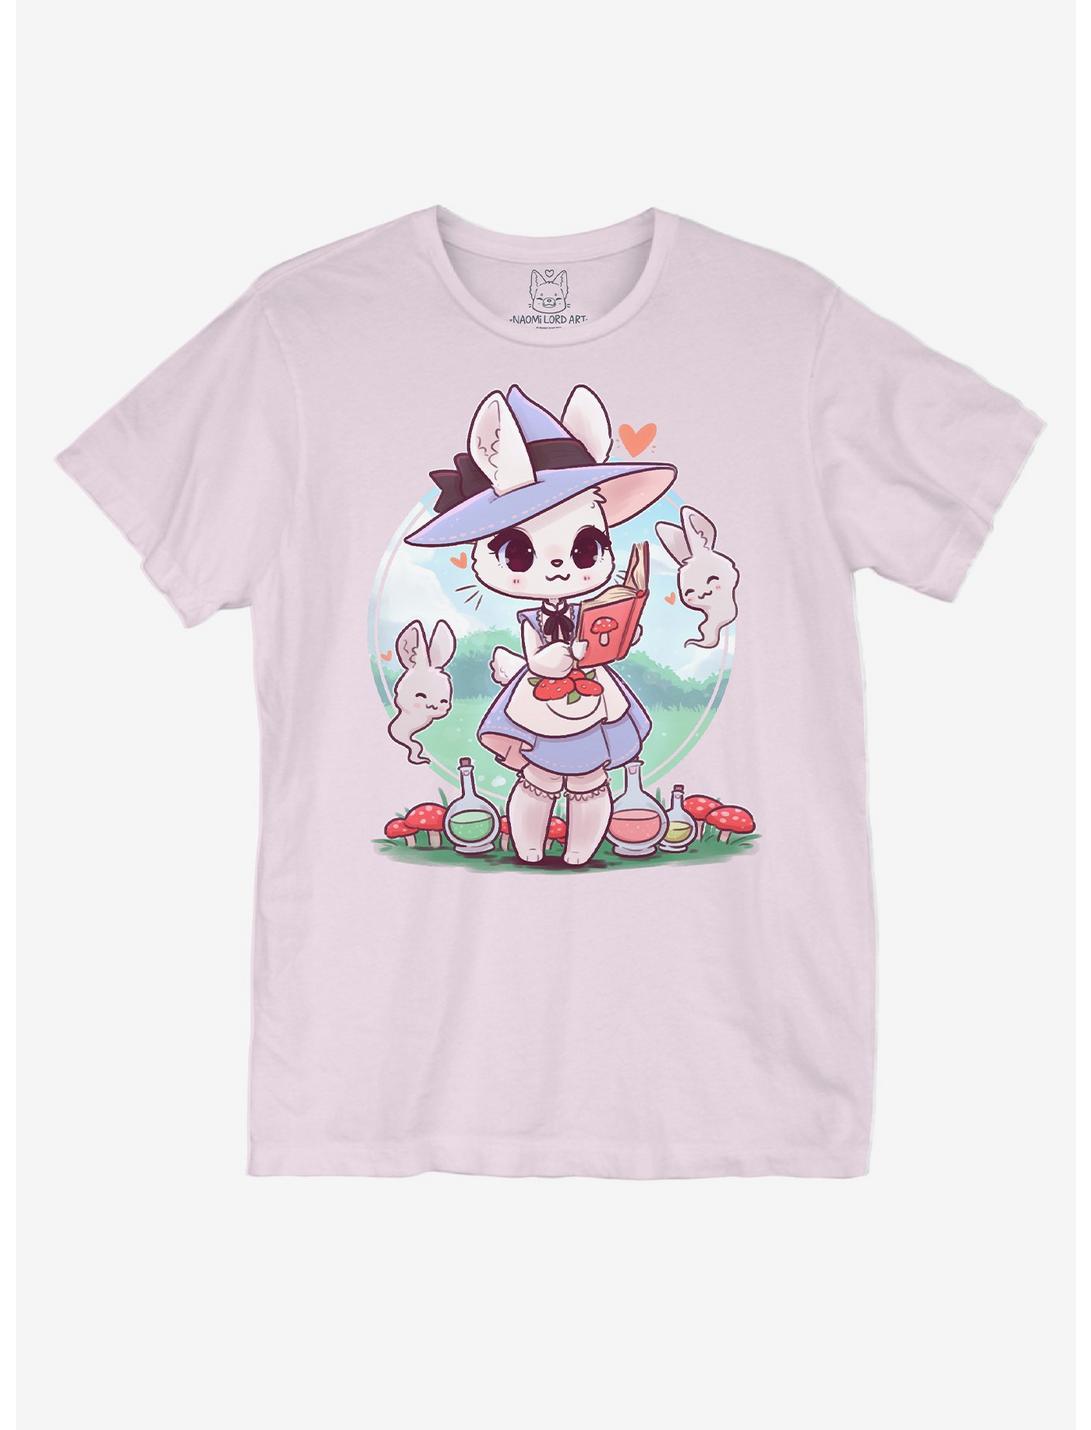 Pastel Witch Bunny Boyfriend Fit Girls T-Shirt By Naomi Lord Art, MULTI, hi-res